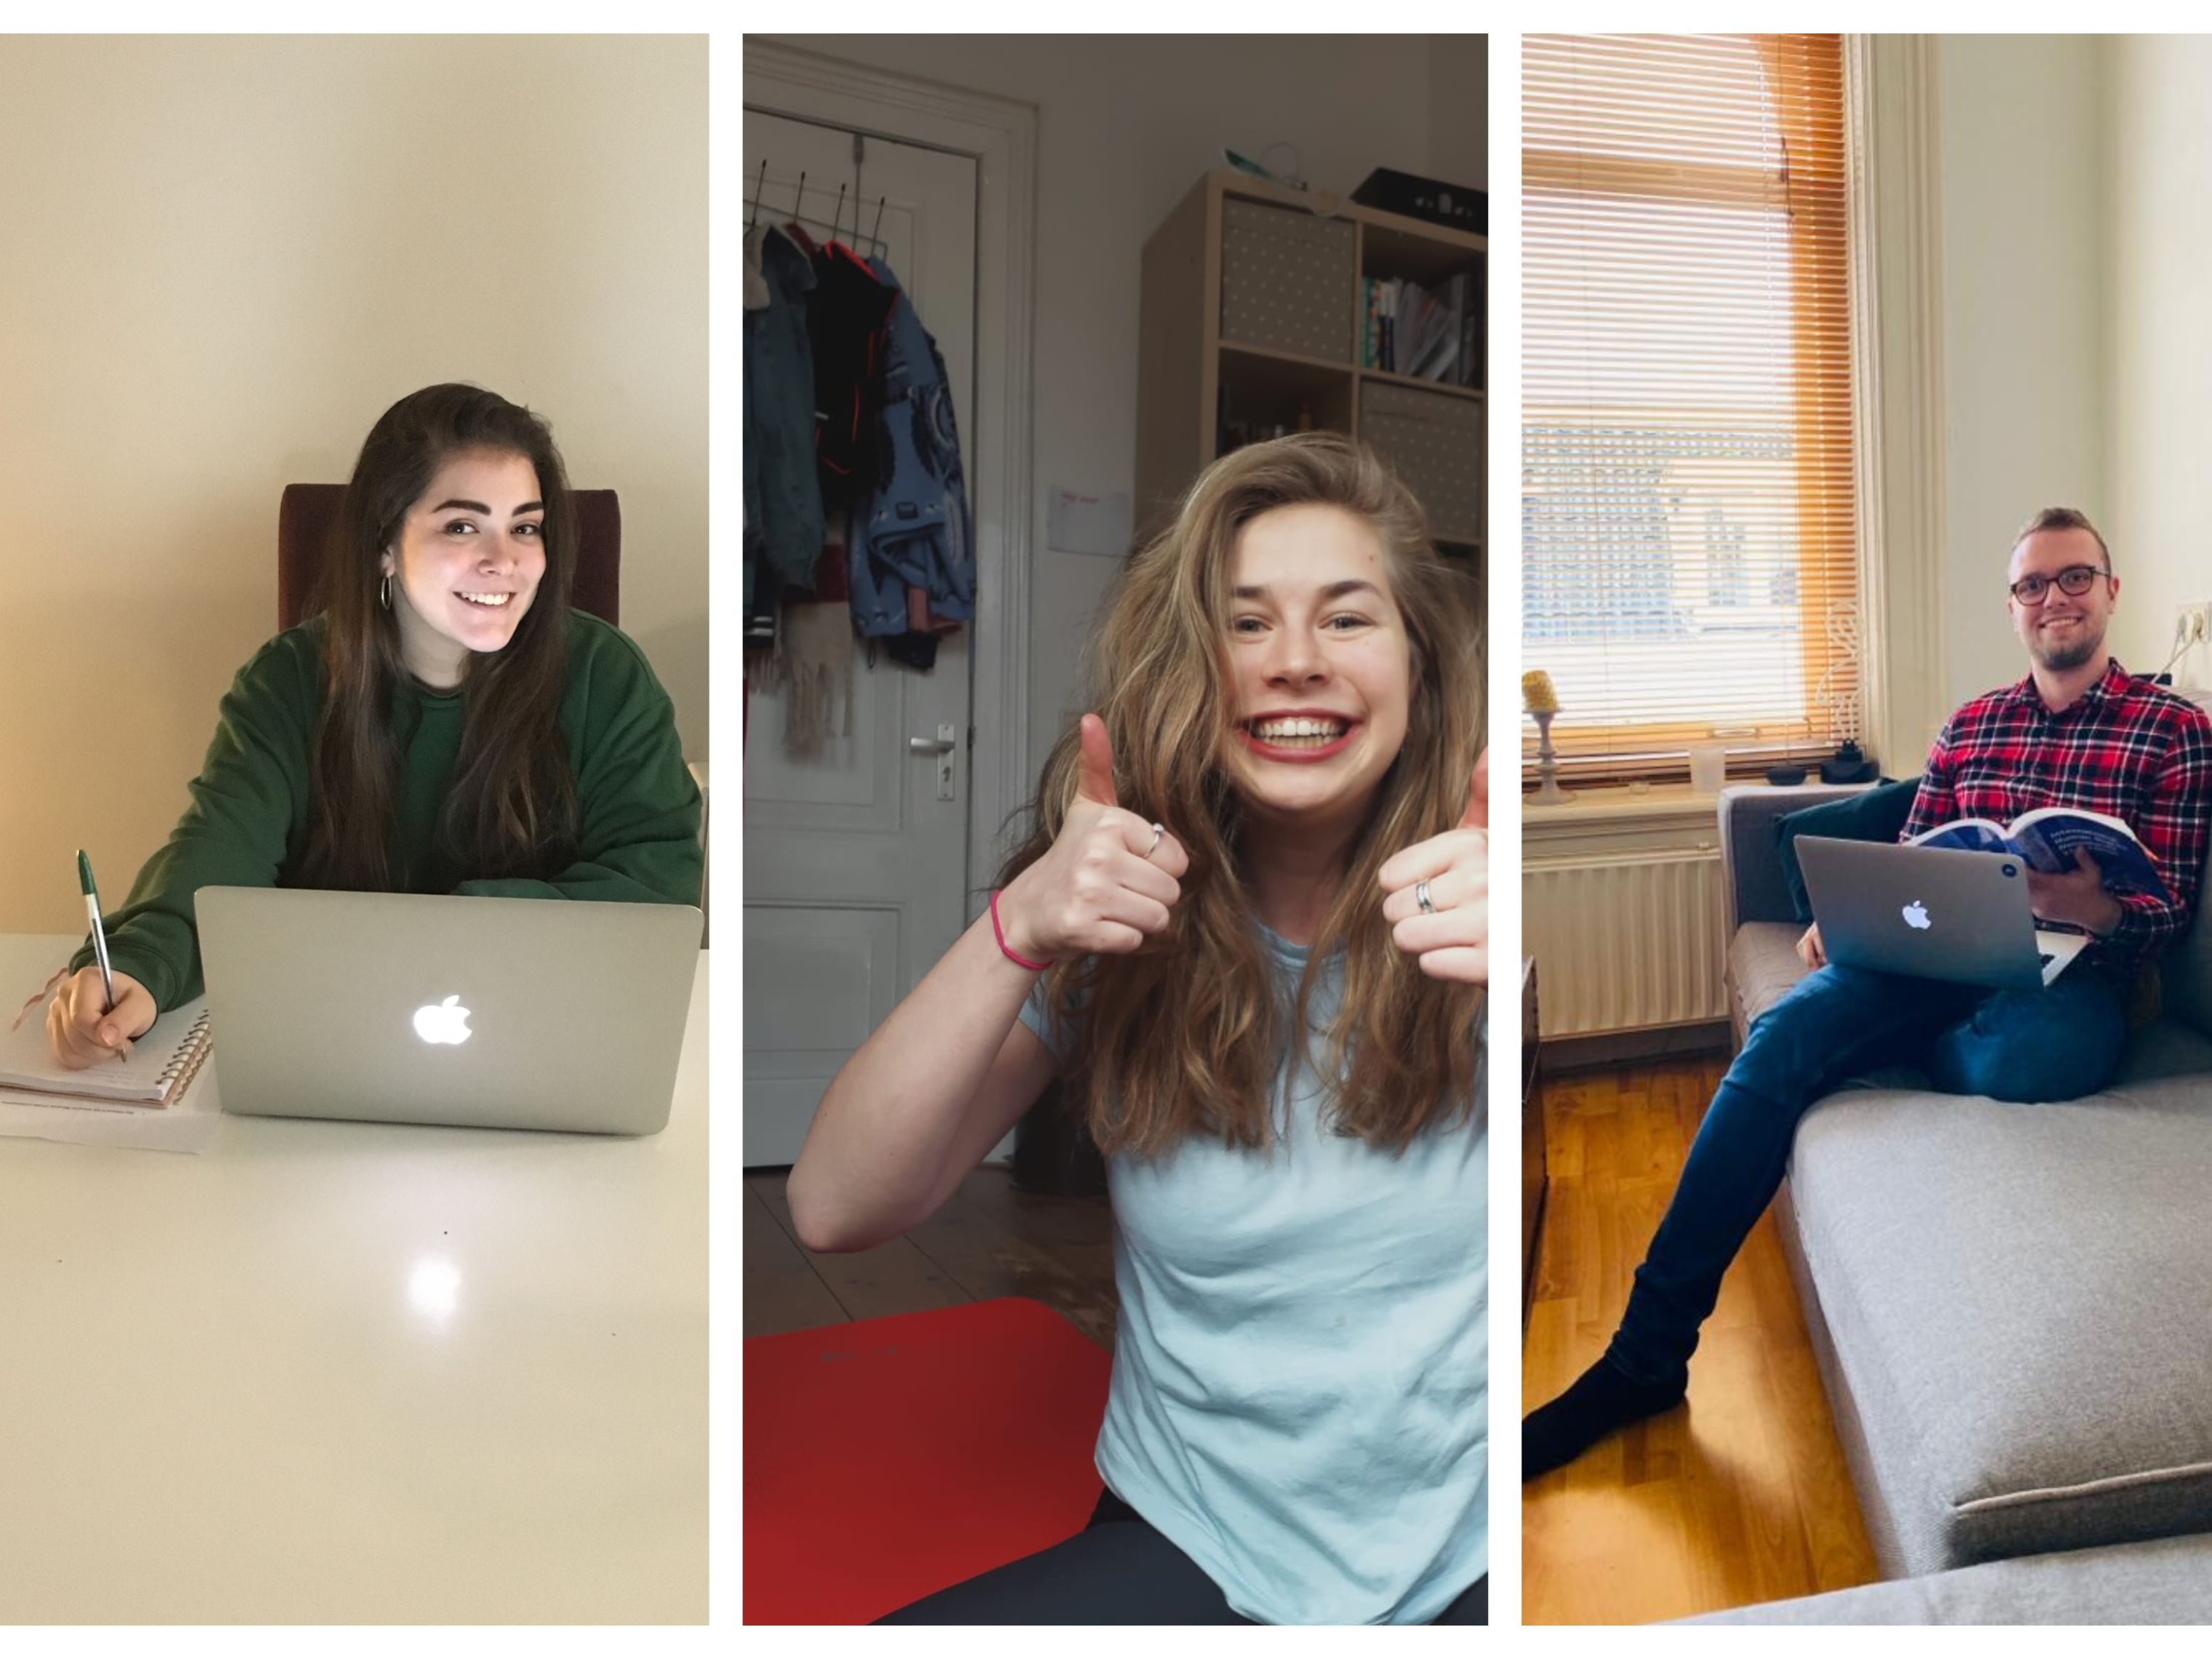 Studying, working, and exercising from home – that's our routine!